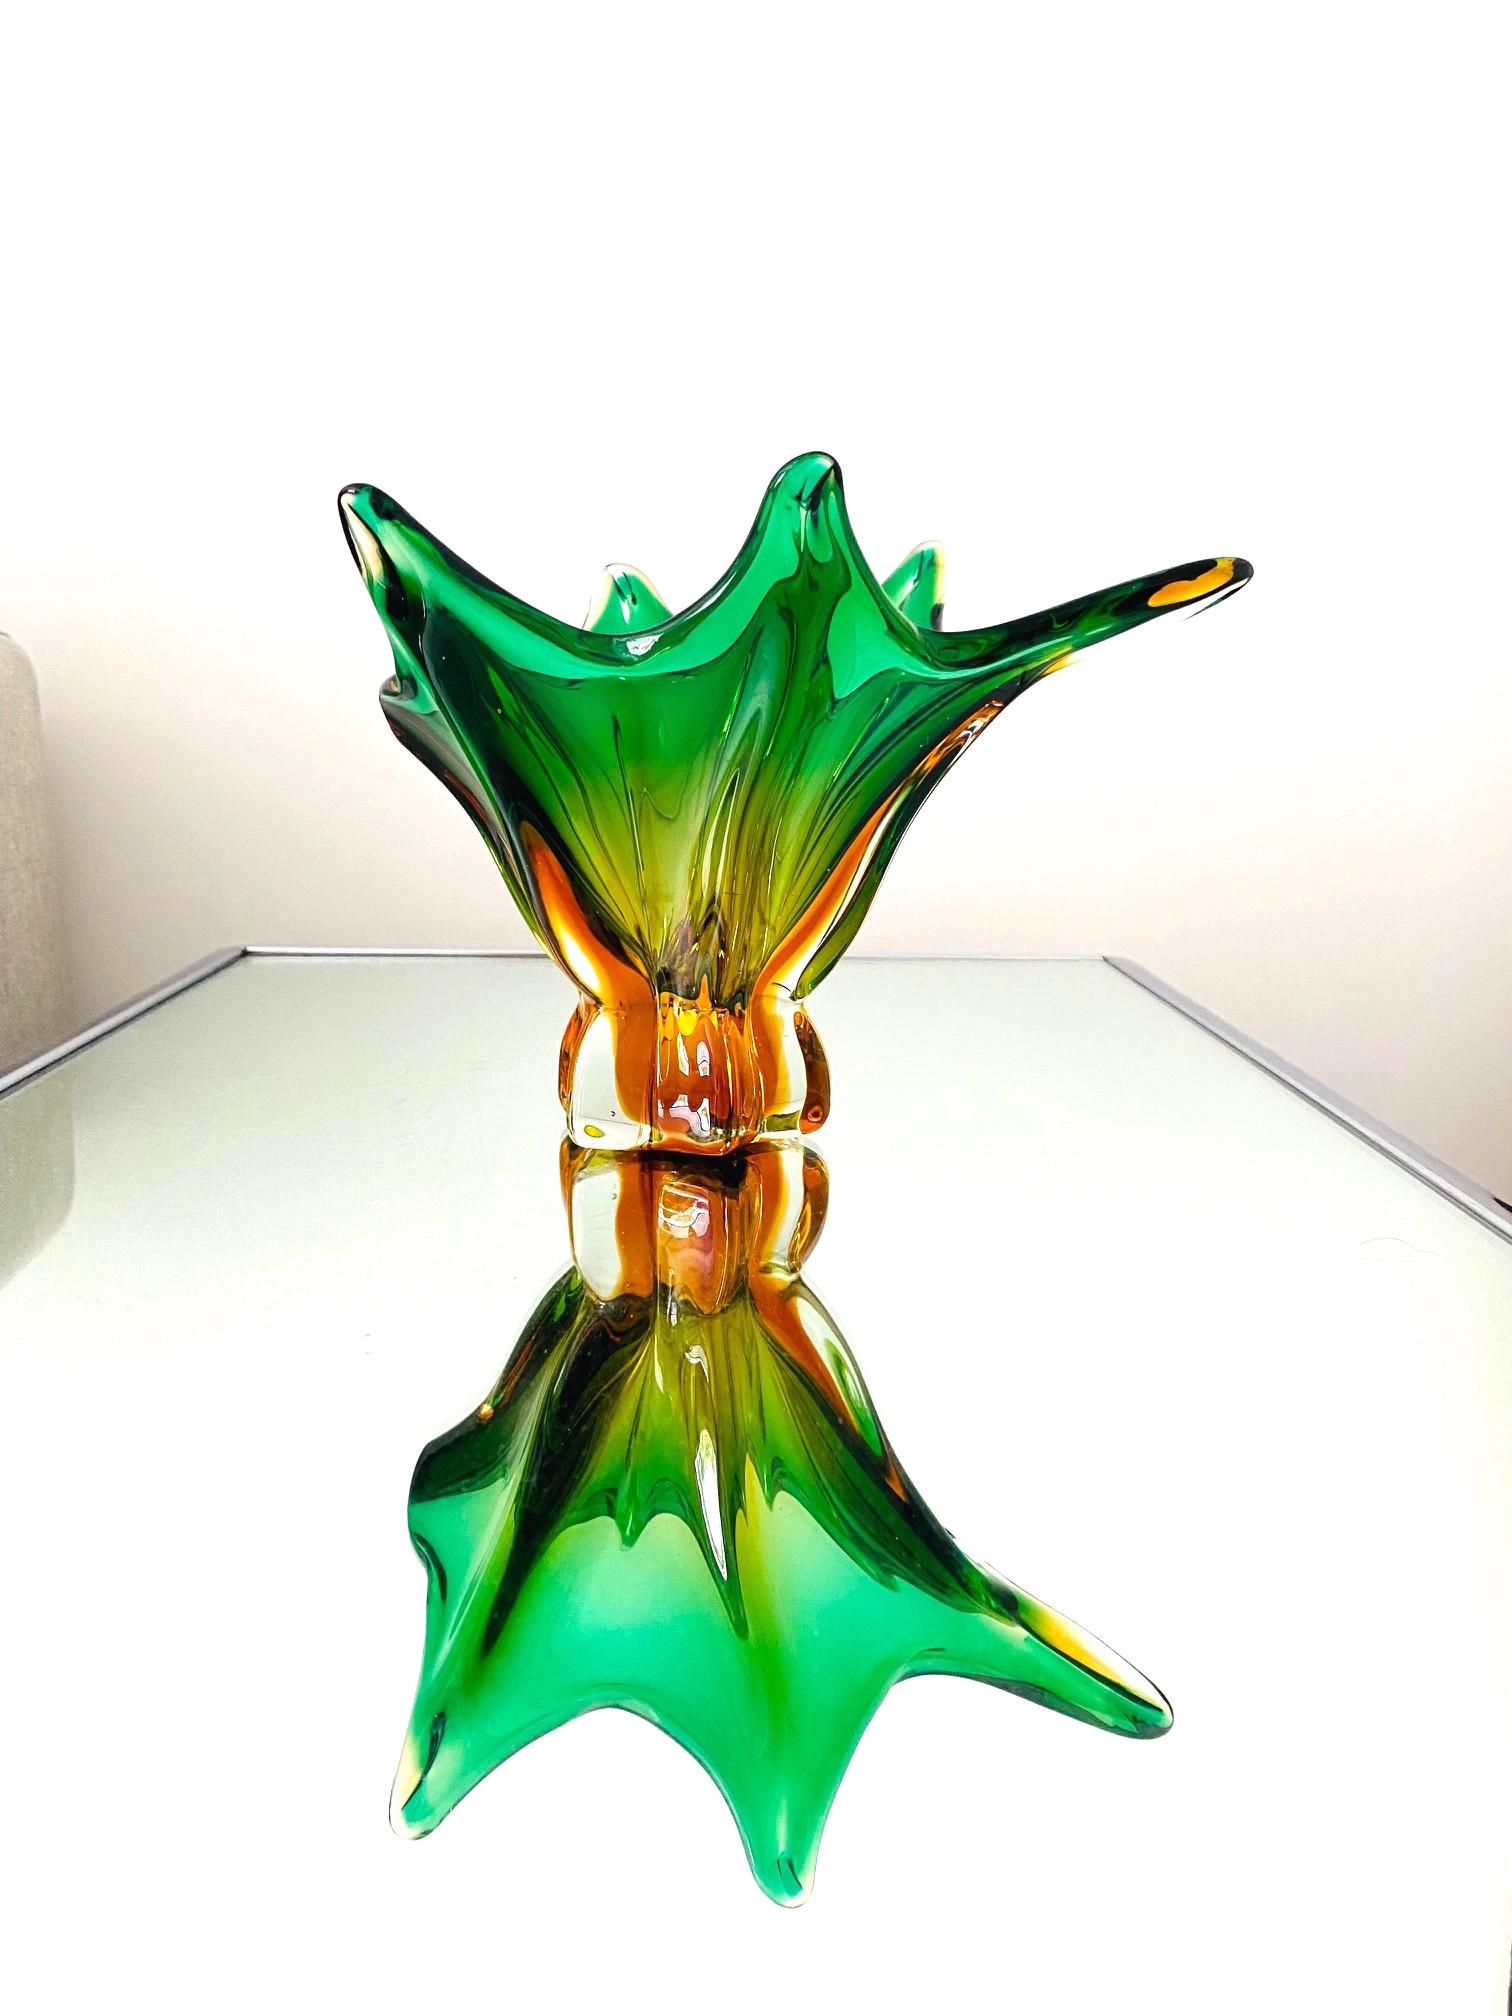 Hand-Crafted Abstract Murano Sommerso Vase or Bowl in Emerald Green & Orange, Italy, c. 1950